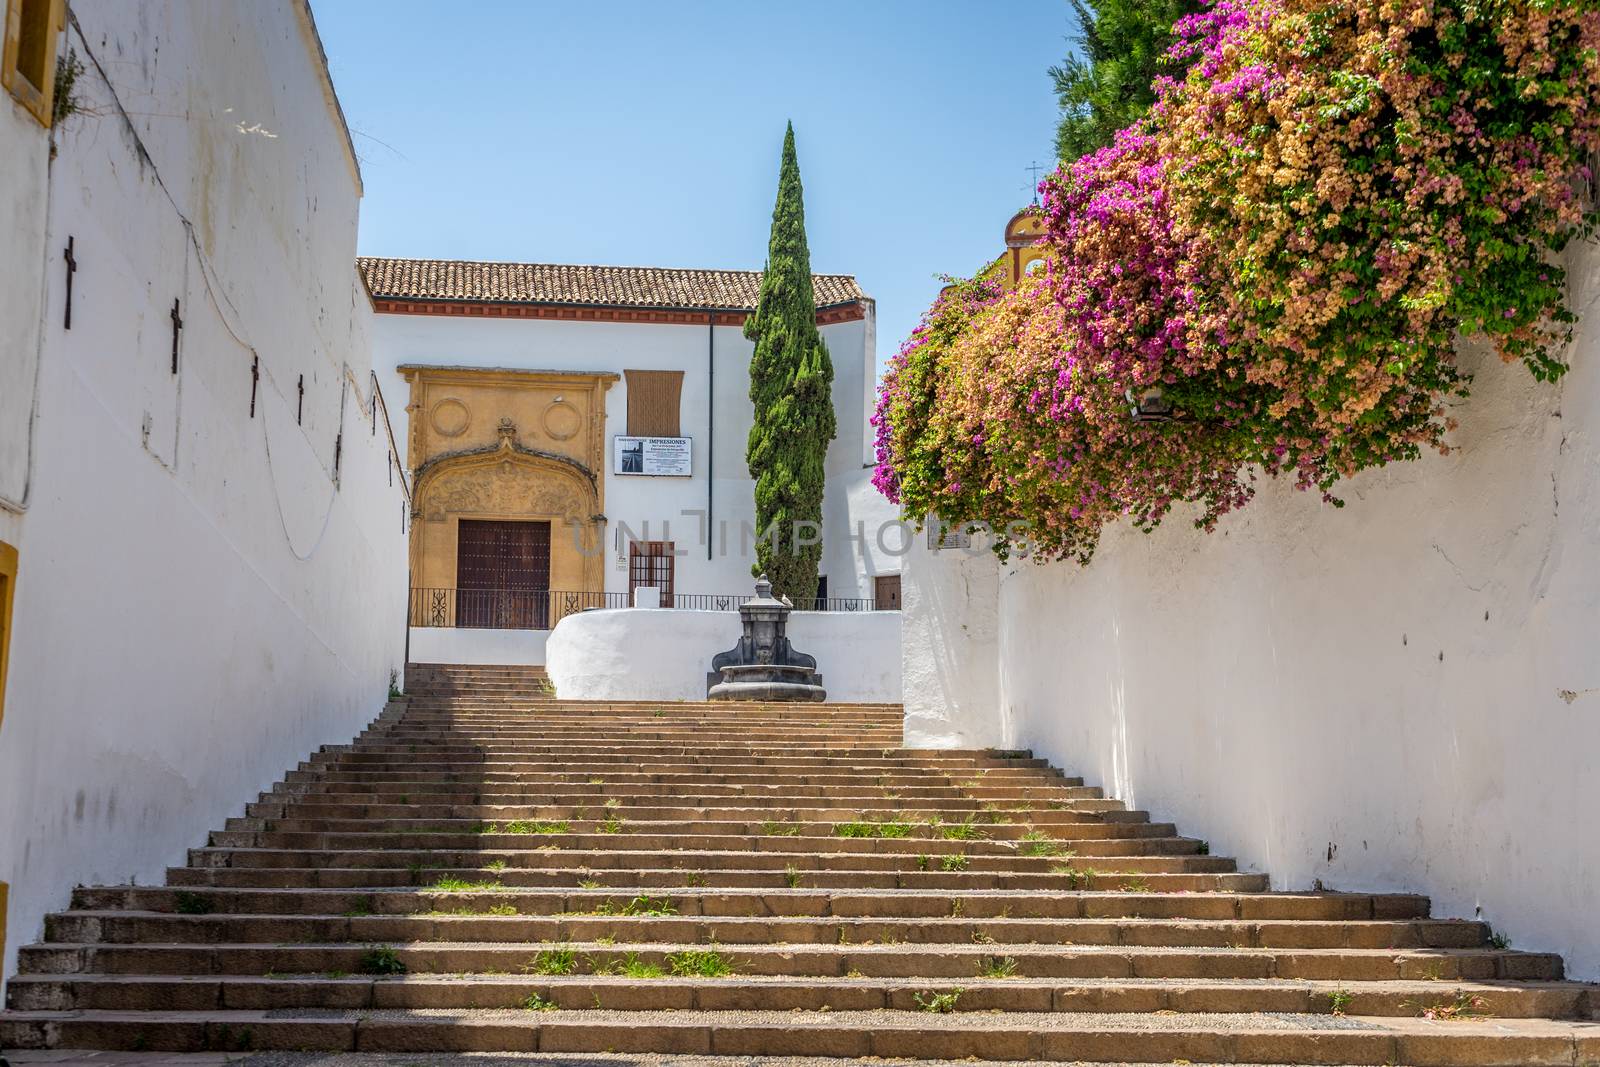 Stone steps leading to a church in the city of Codoba, Spain, Eu by ramana16